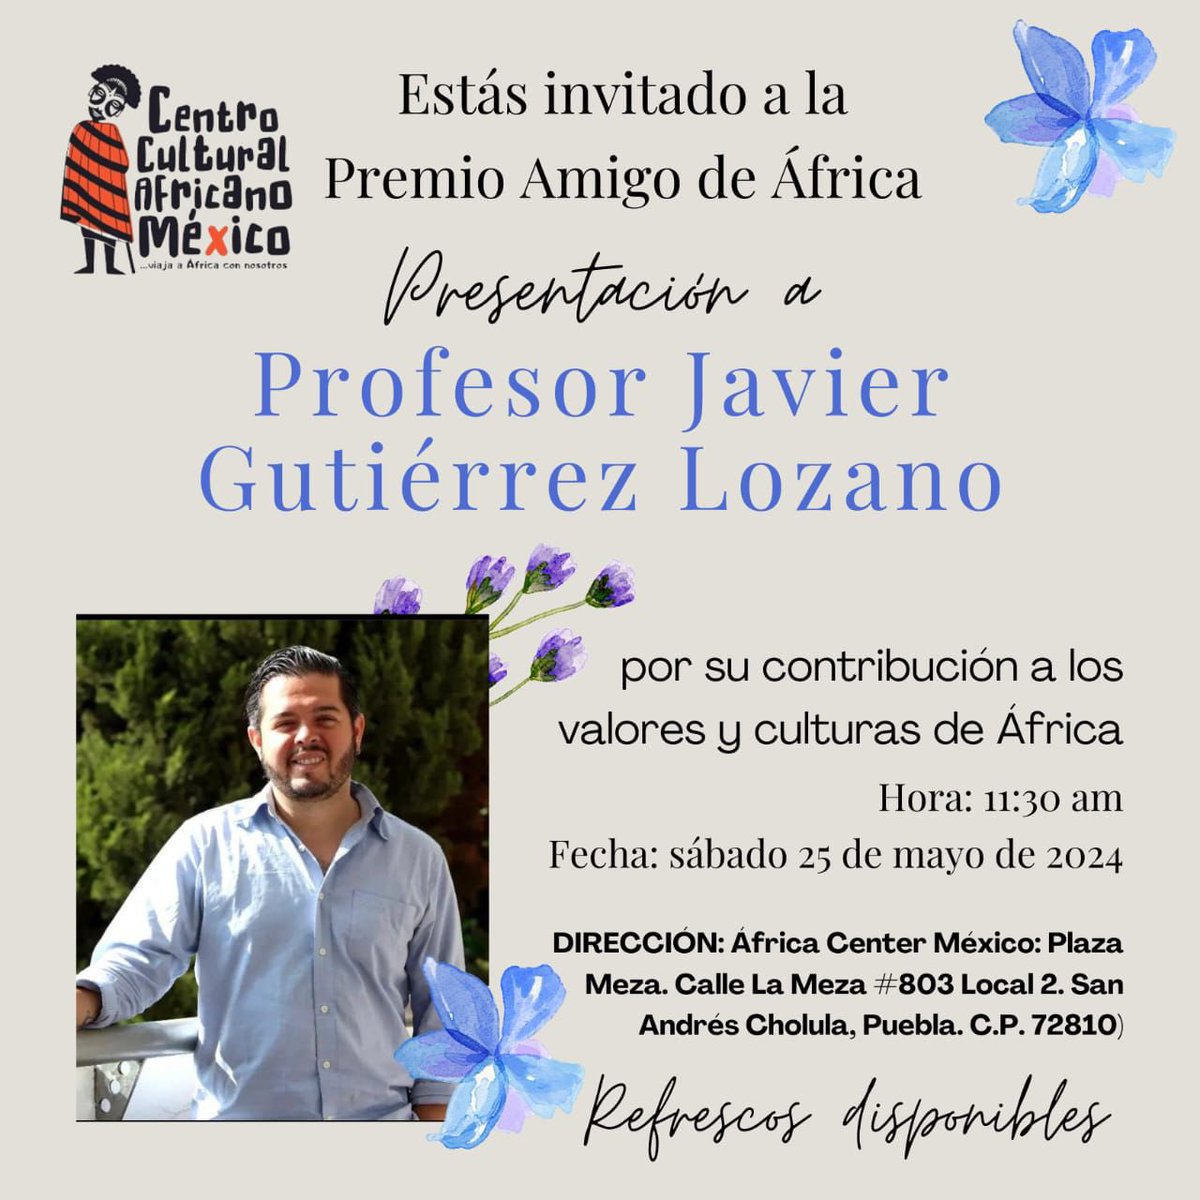 You are invited to witness this at the Africa Center Mexico.